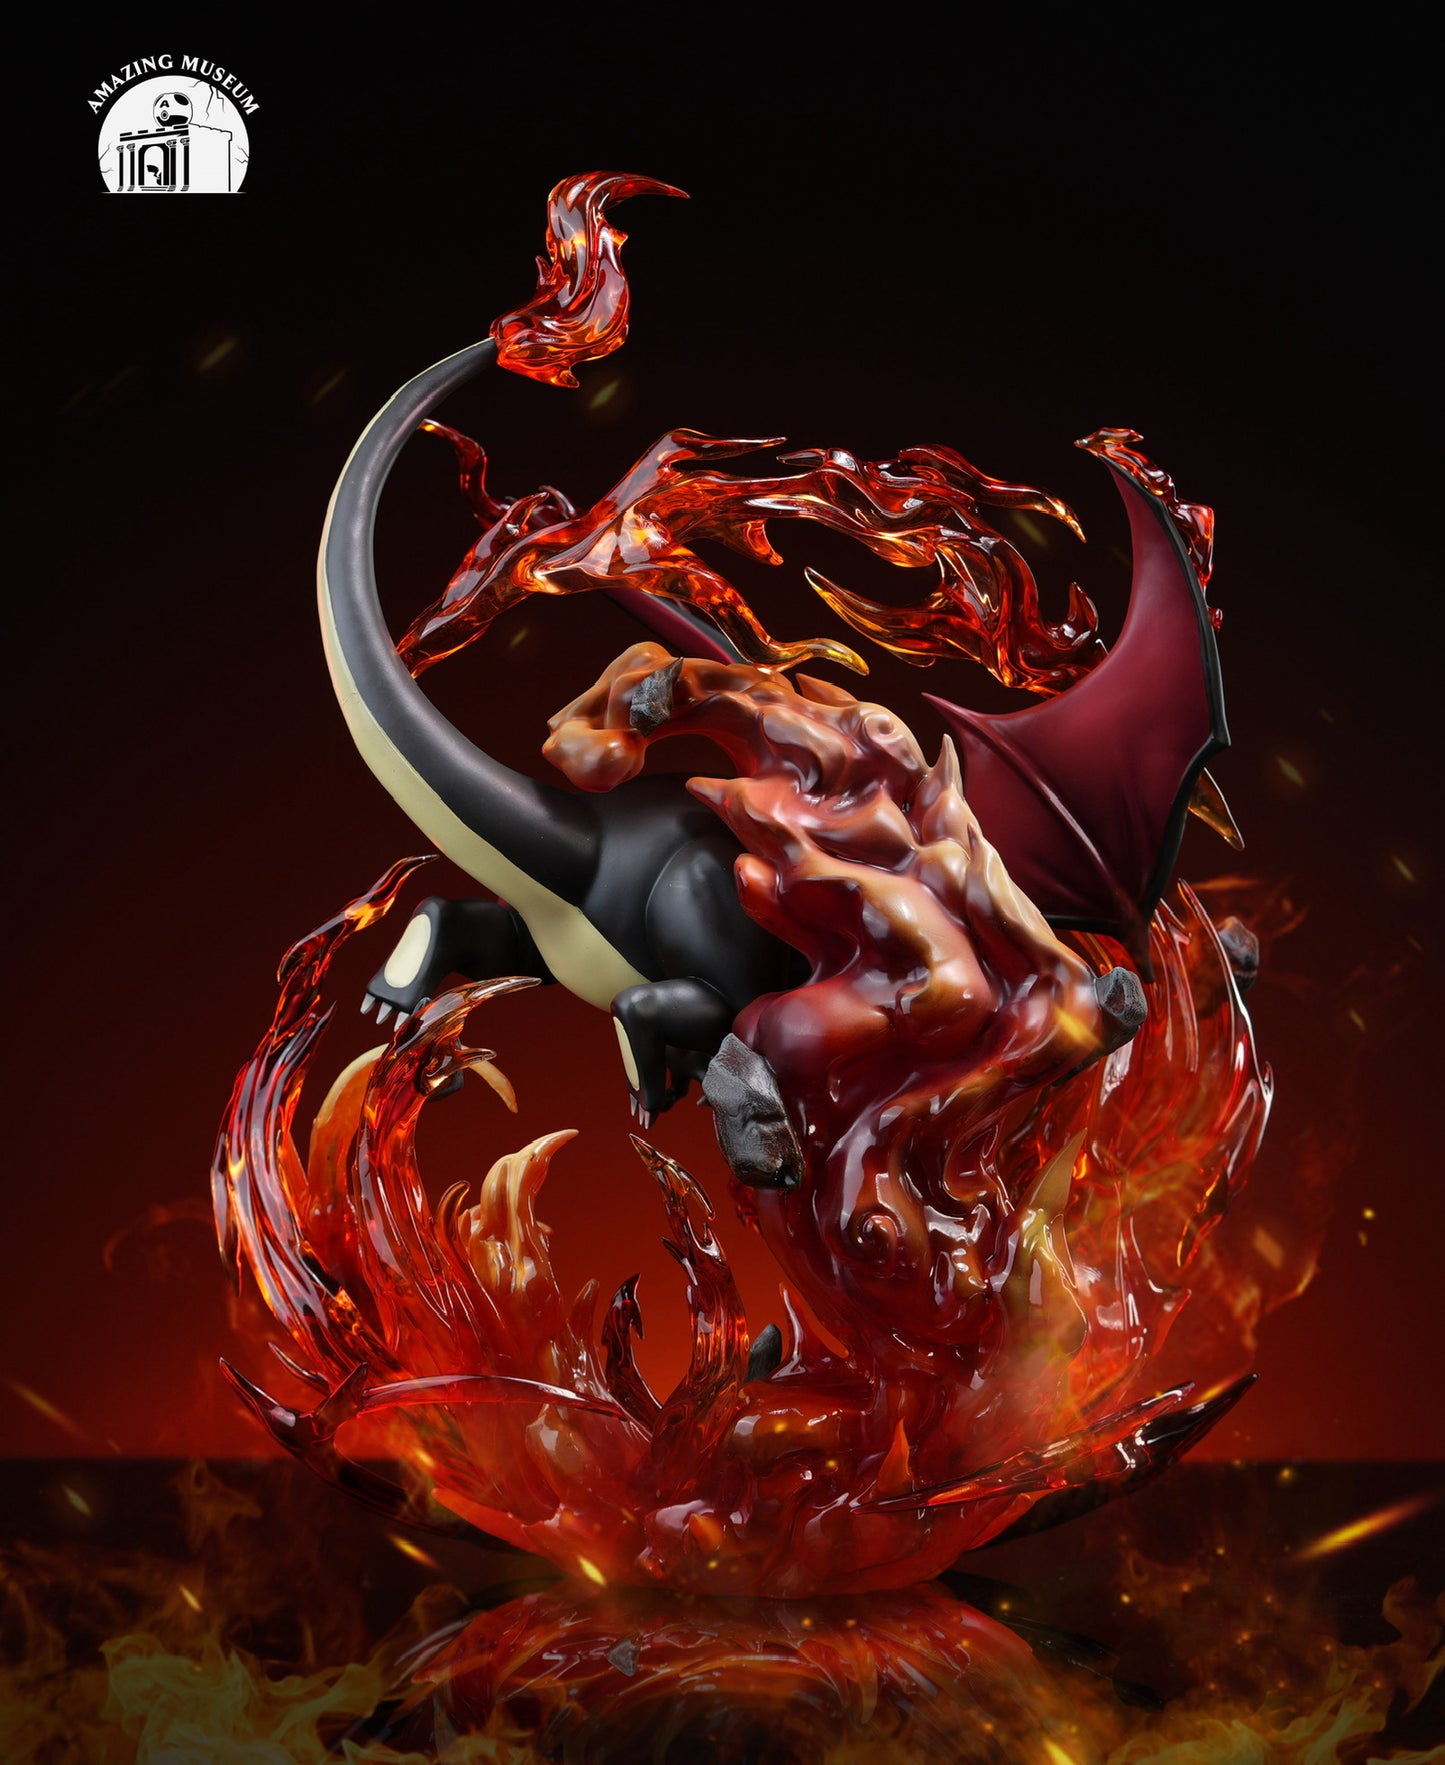 [PREORDER CLOSED] Statue [AMAZING MUSEUM] - Charizard